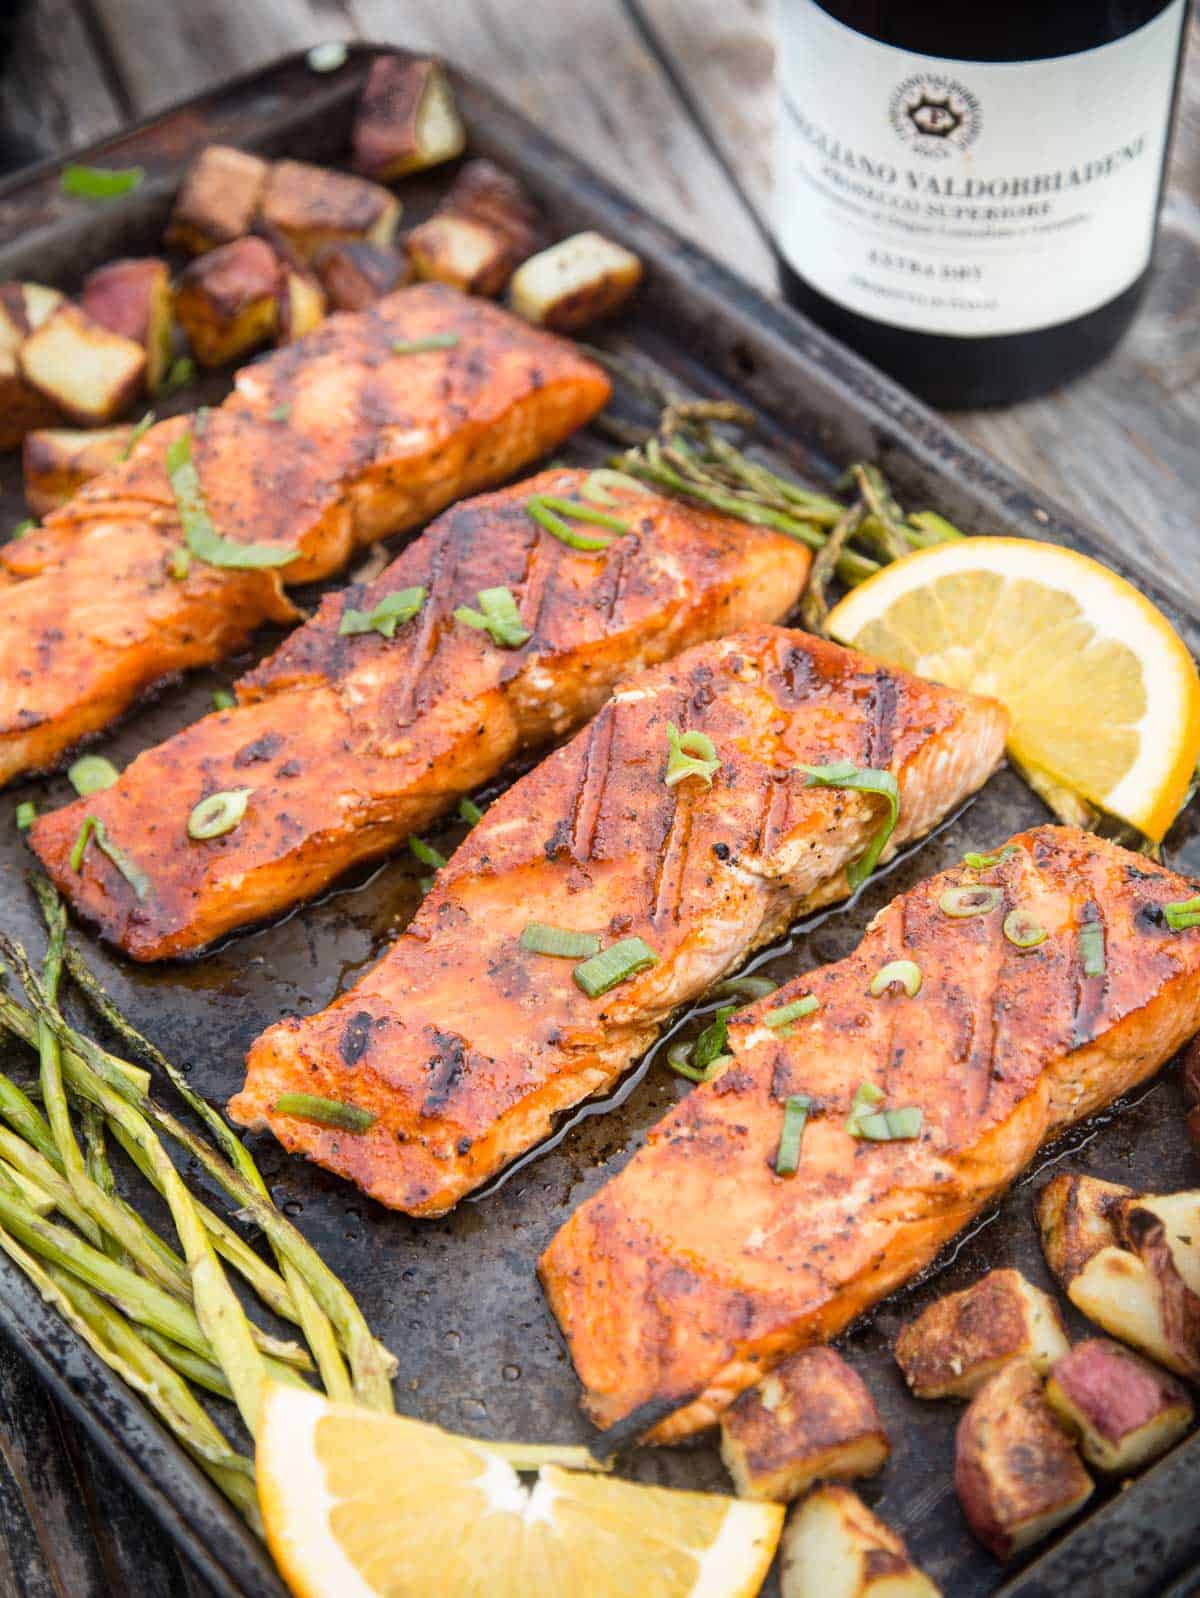 Grilled salmon on a sheet pan with a bottle of Prosecco wine pairing